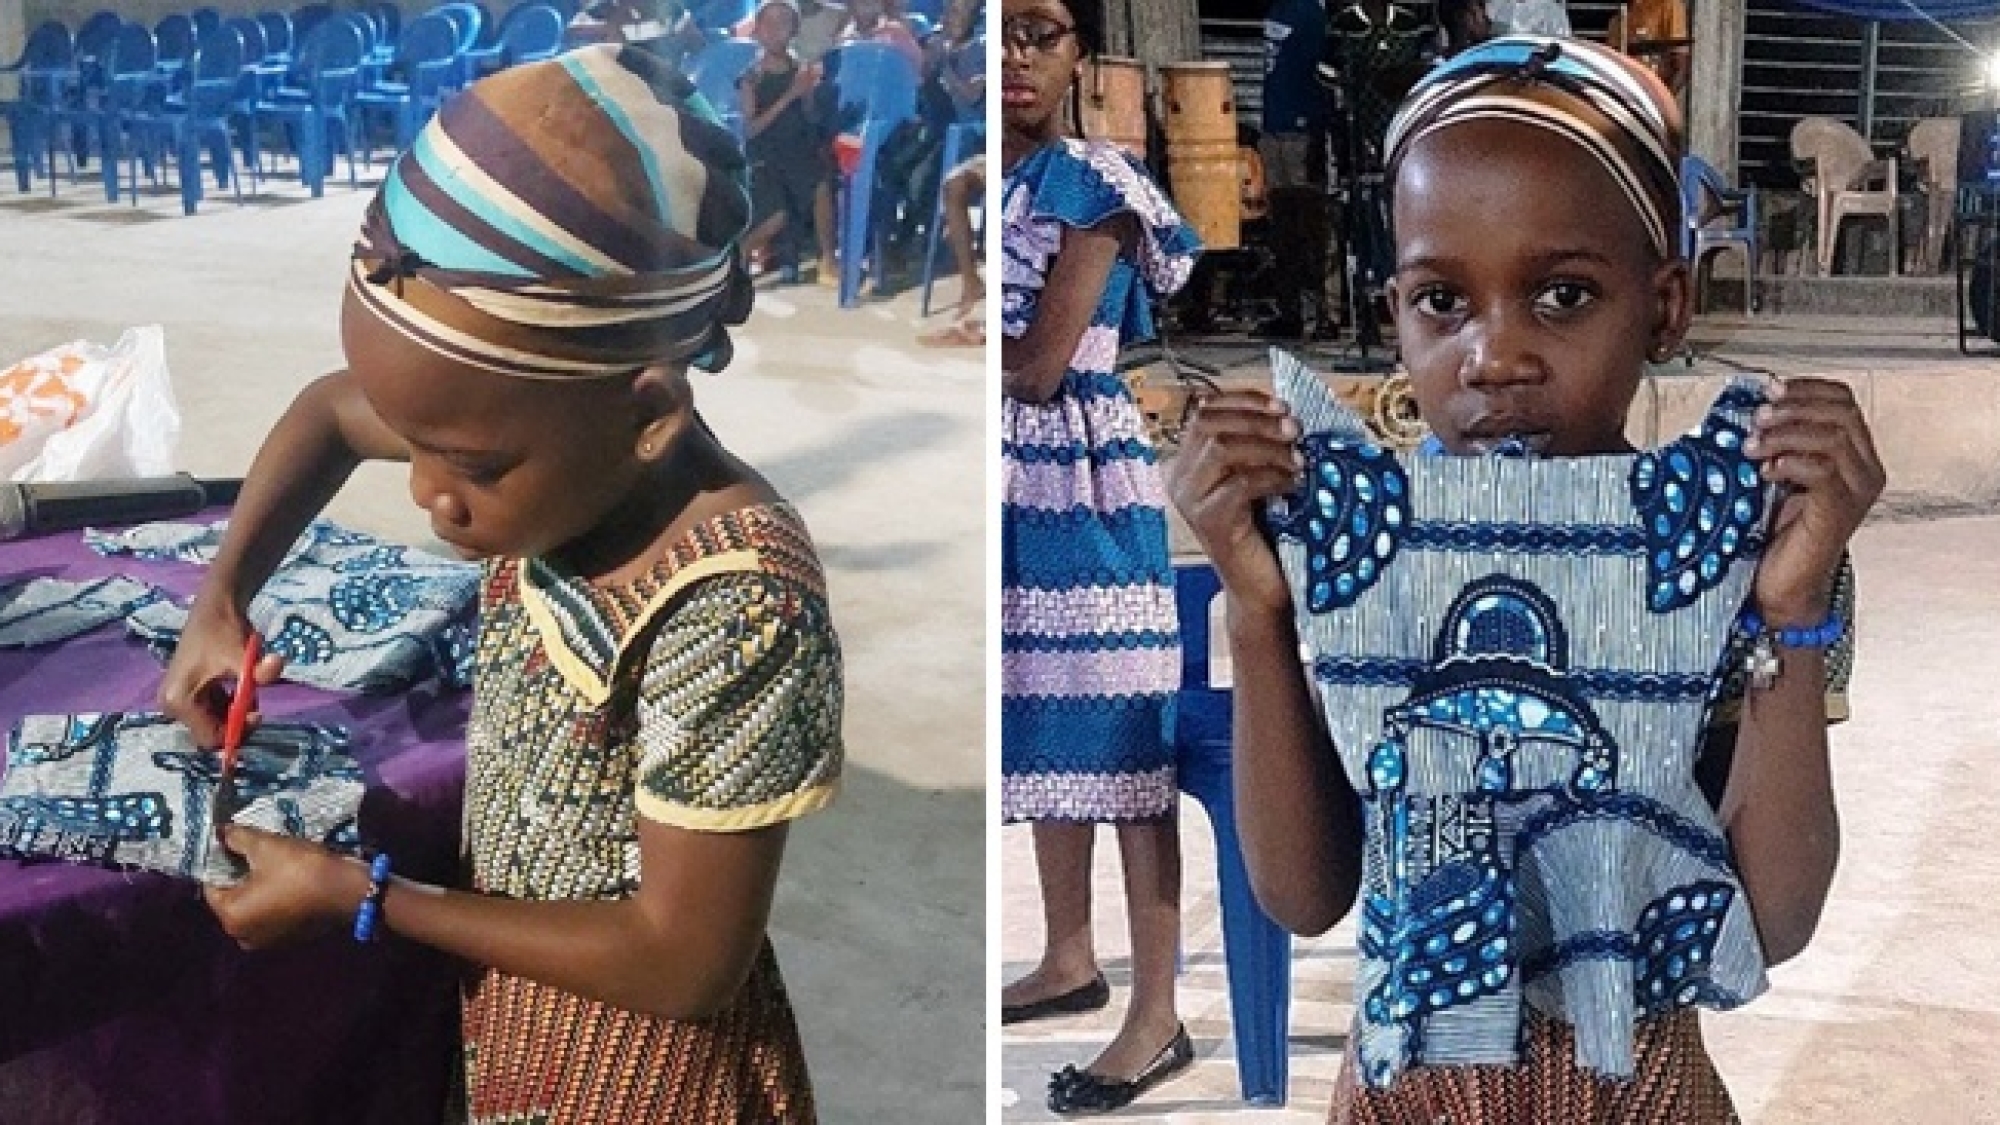 9-Year-Old Sunday School Girl Sews Dress In 15 Minutes web